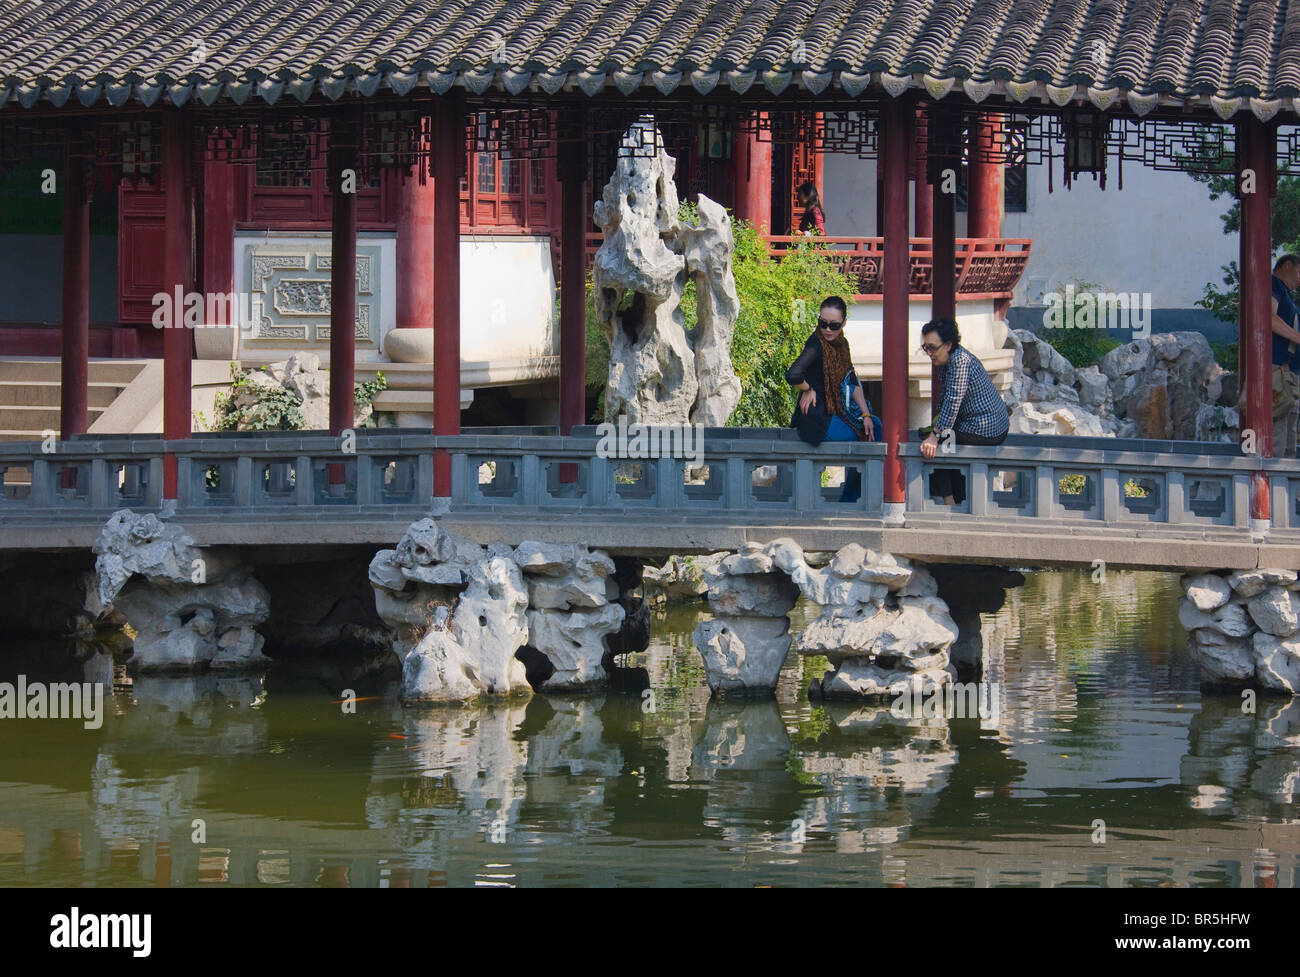 Traditional architecture in Yuyuan Garden, Shanghai, China Stock Photo